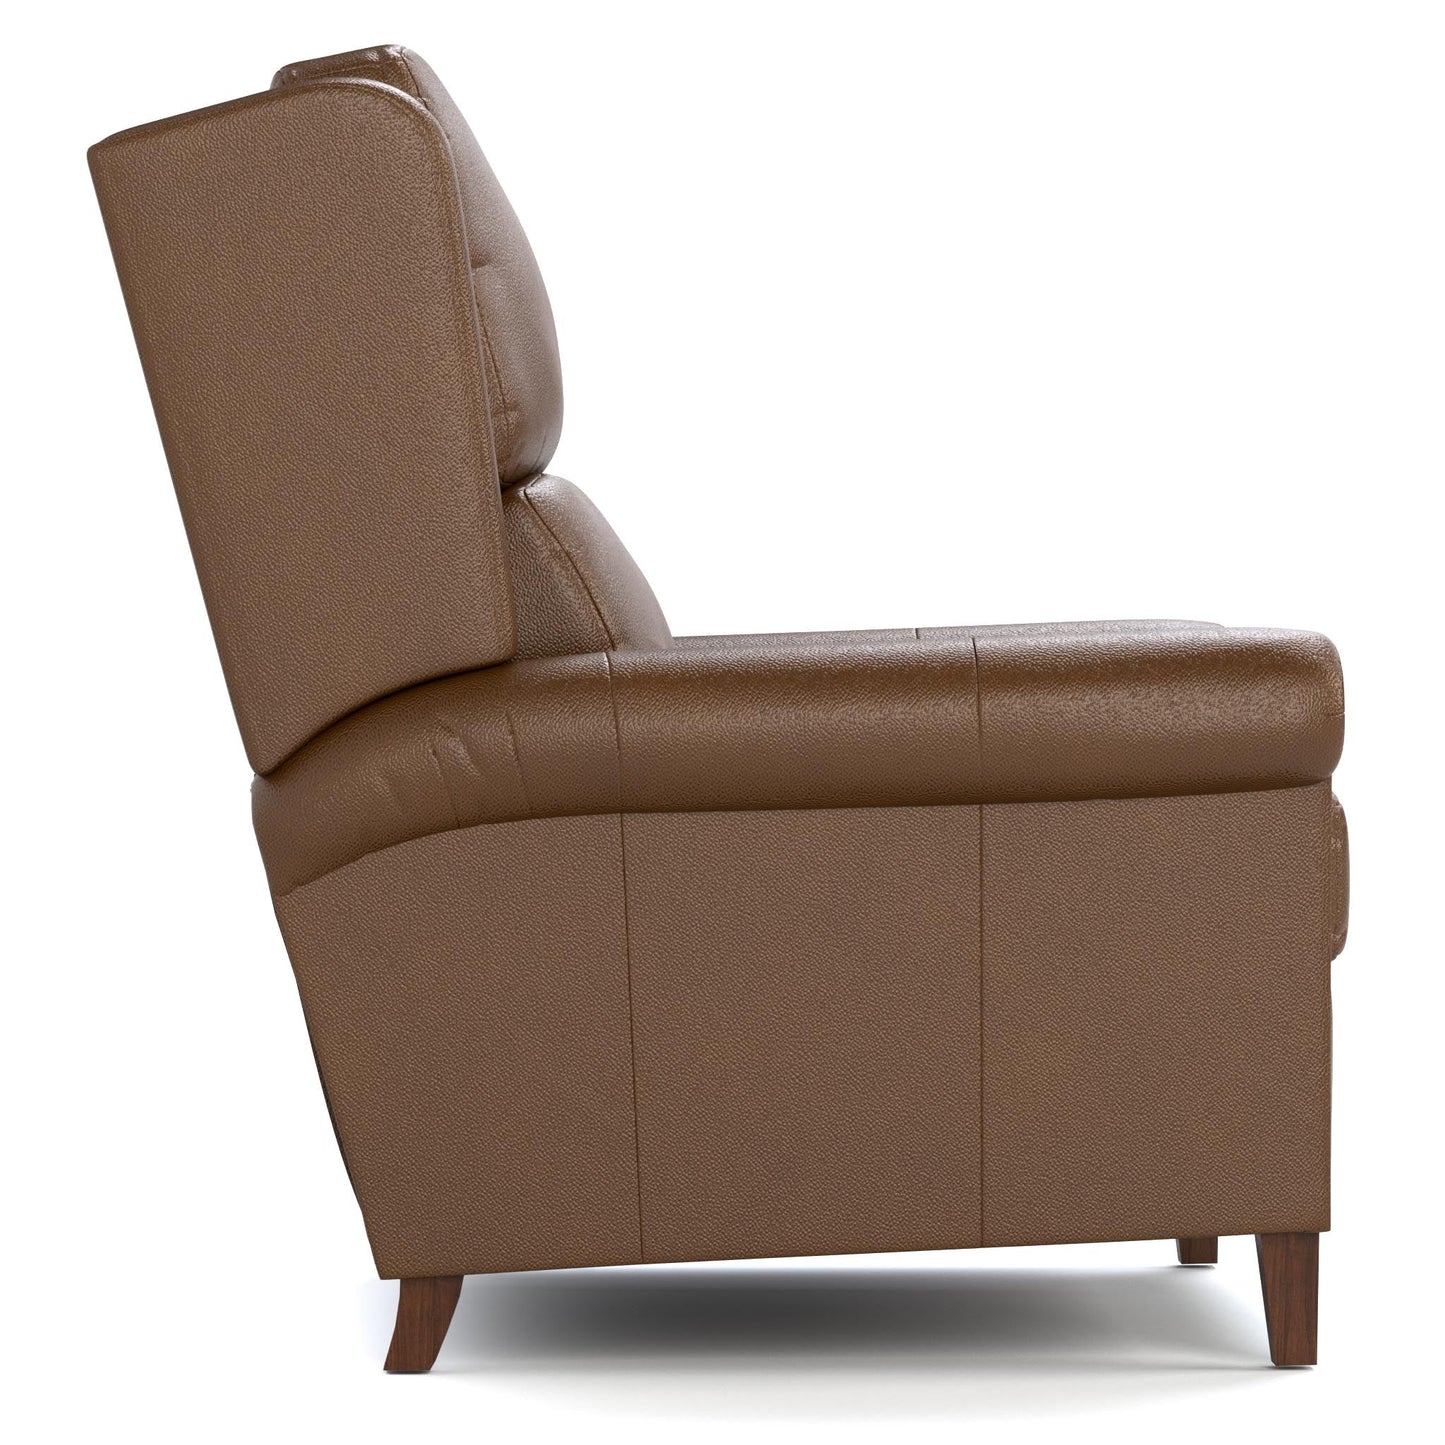 Woodlands Small Roll Arm Manual Recliner Selvano Bark - Side